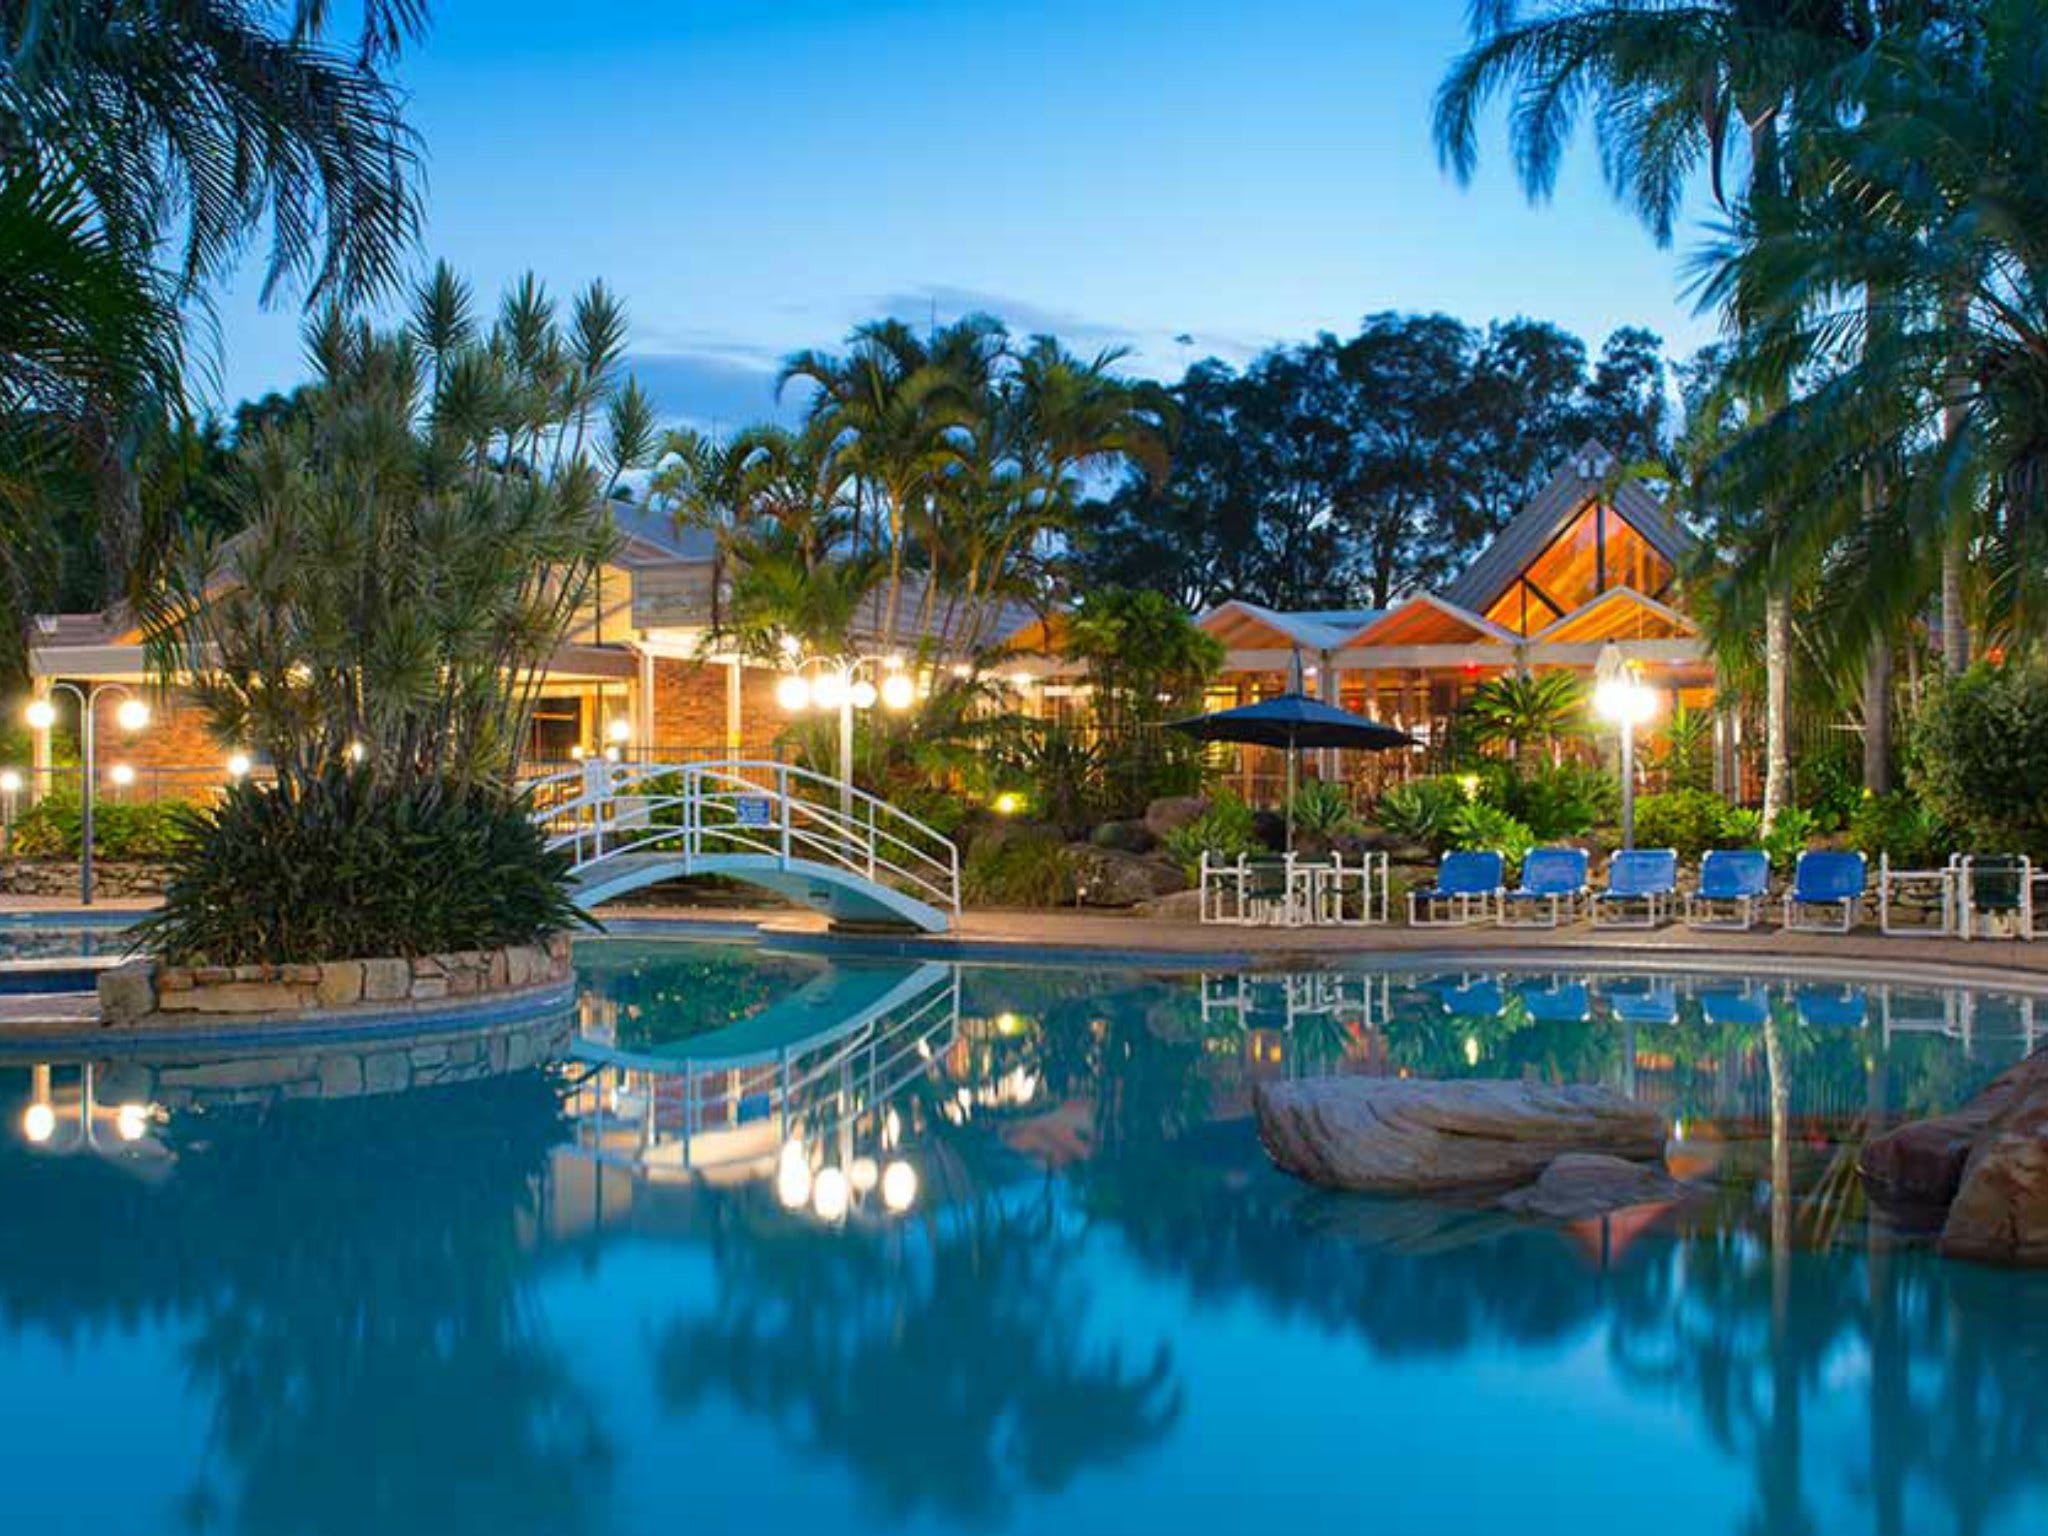 Boambee Bay Resort - Tourism Canberra